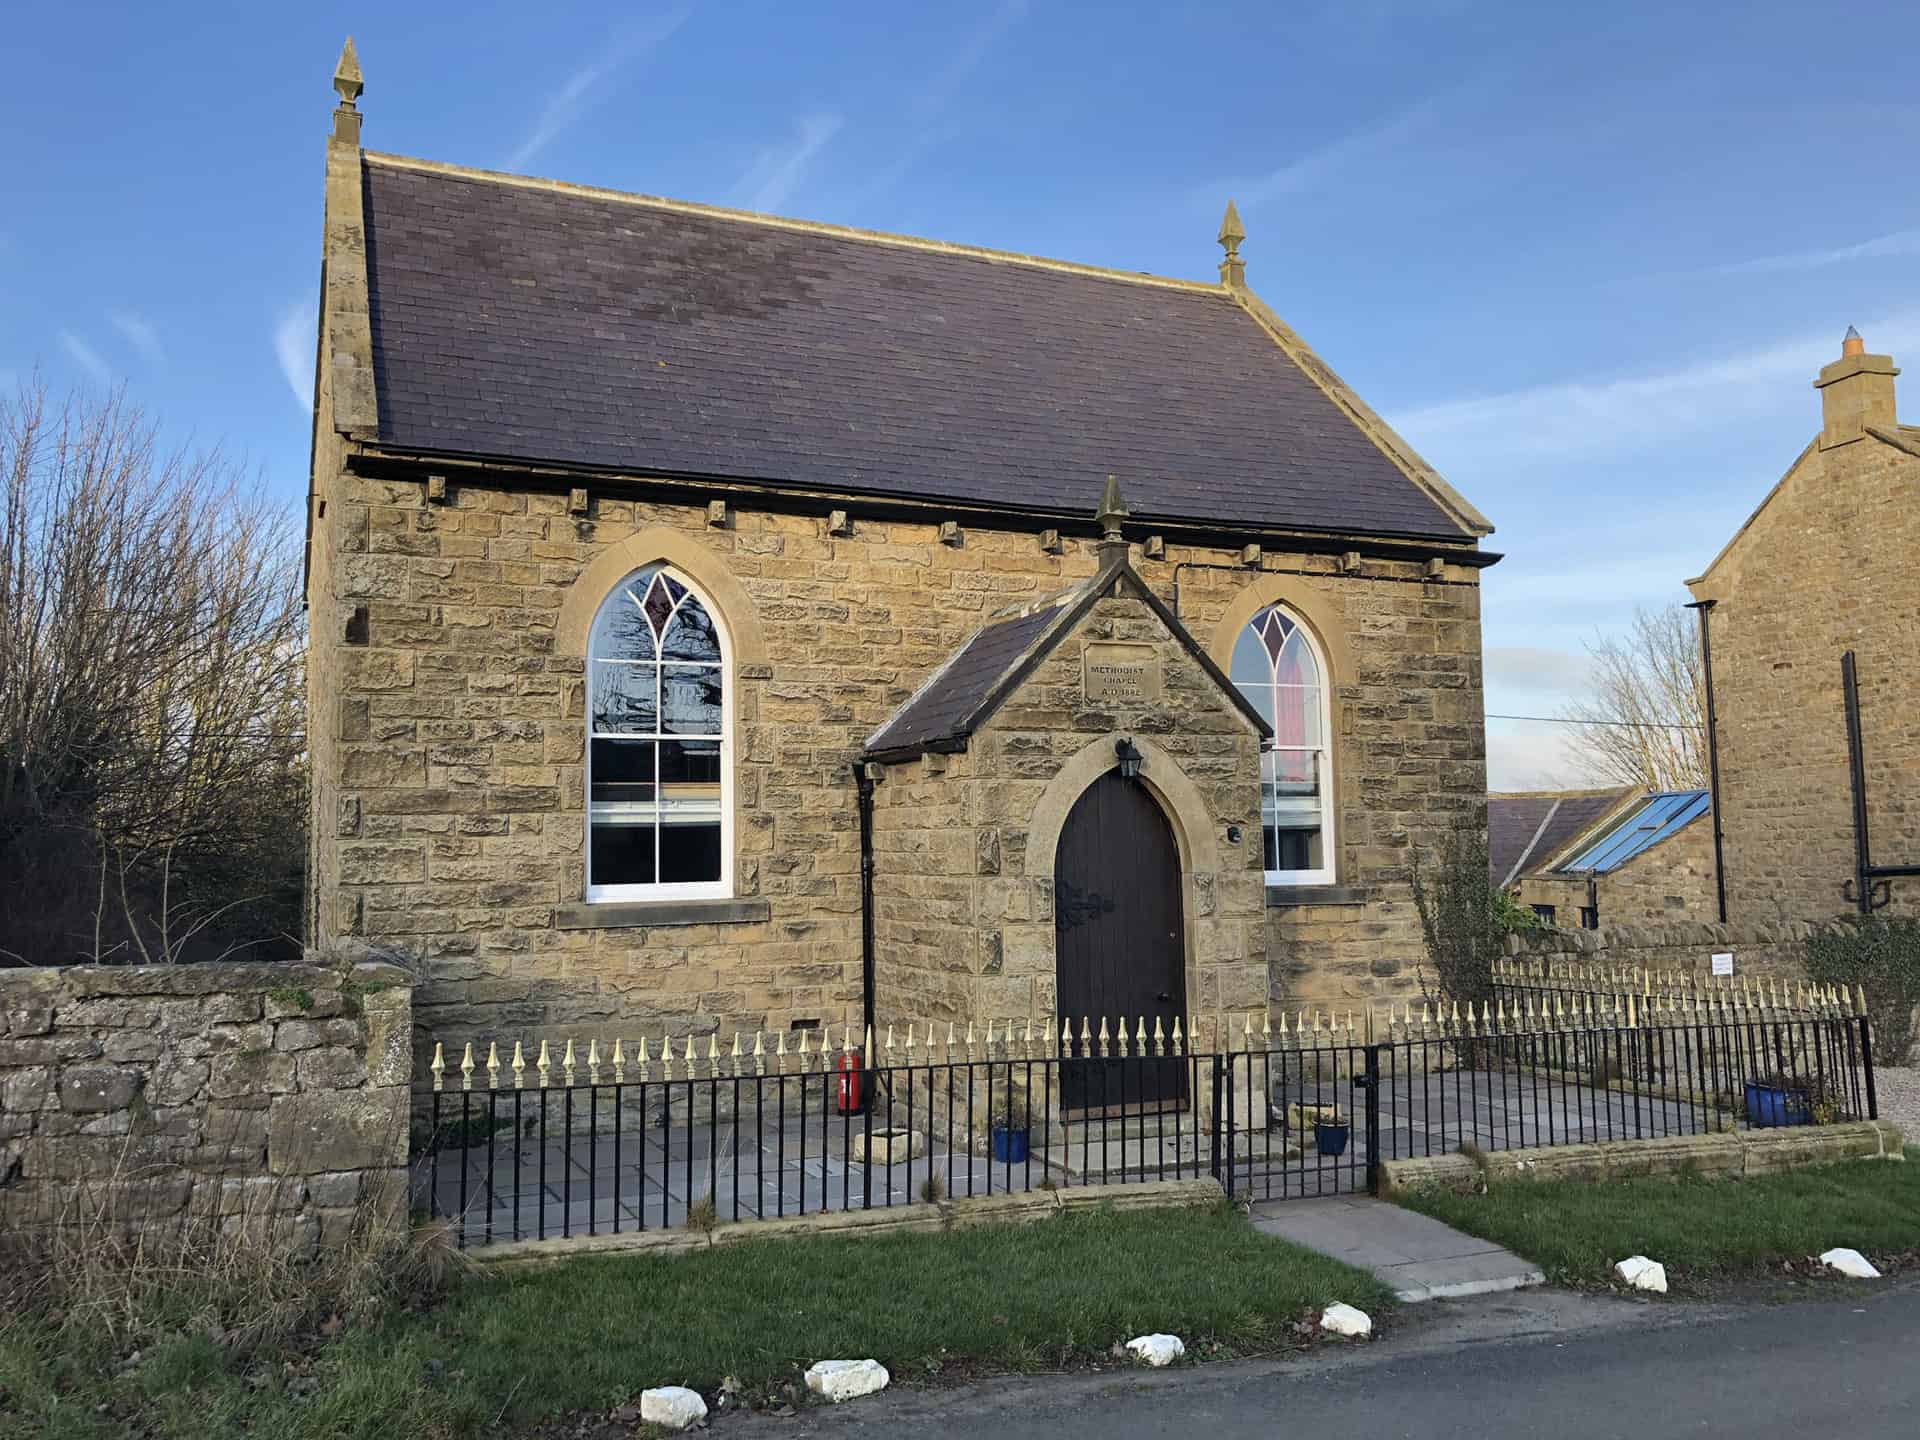 The Old Chapel in East Witton. Kate Bottley walked through East Witton in BBC Winter Walks S2E3.